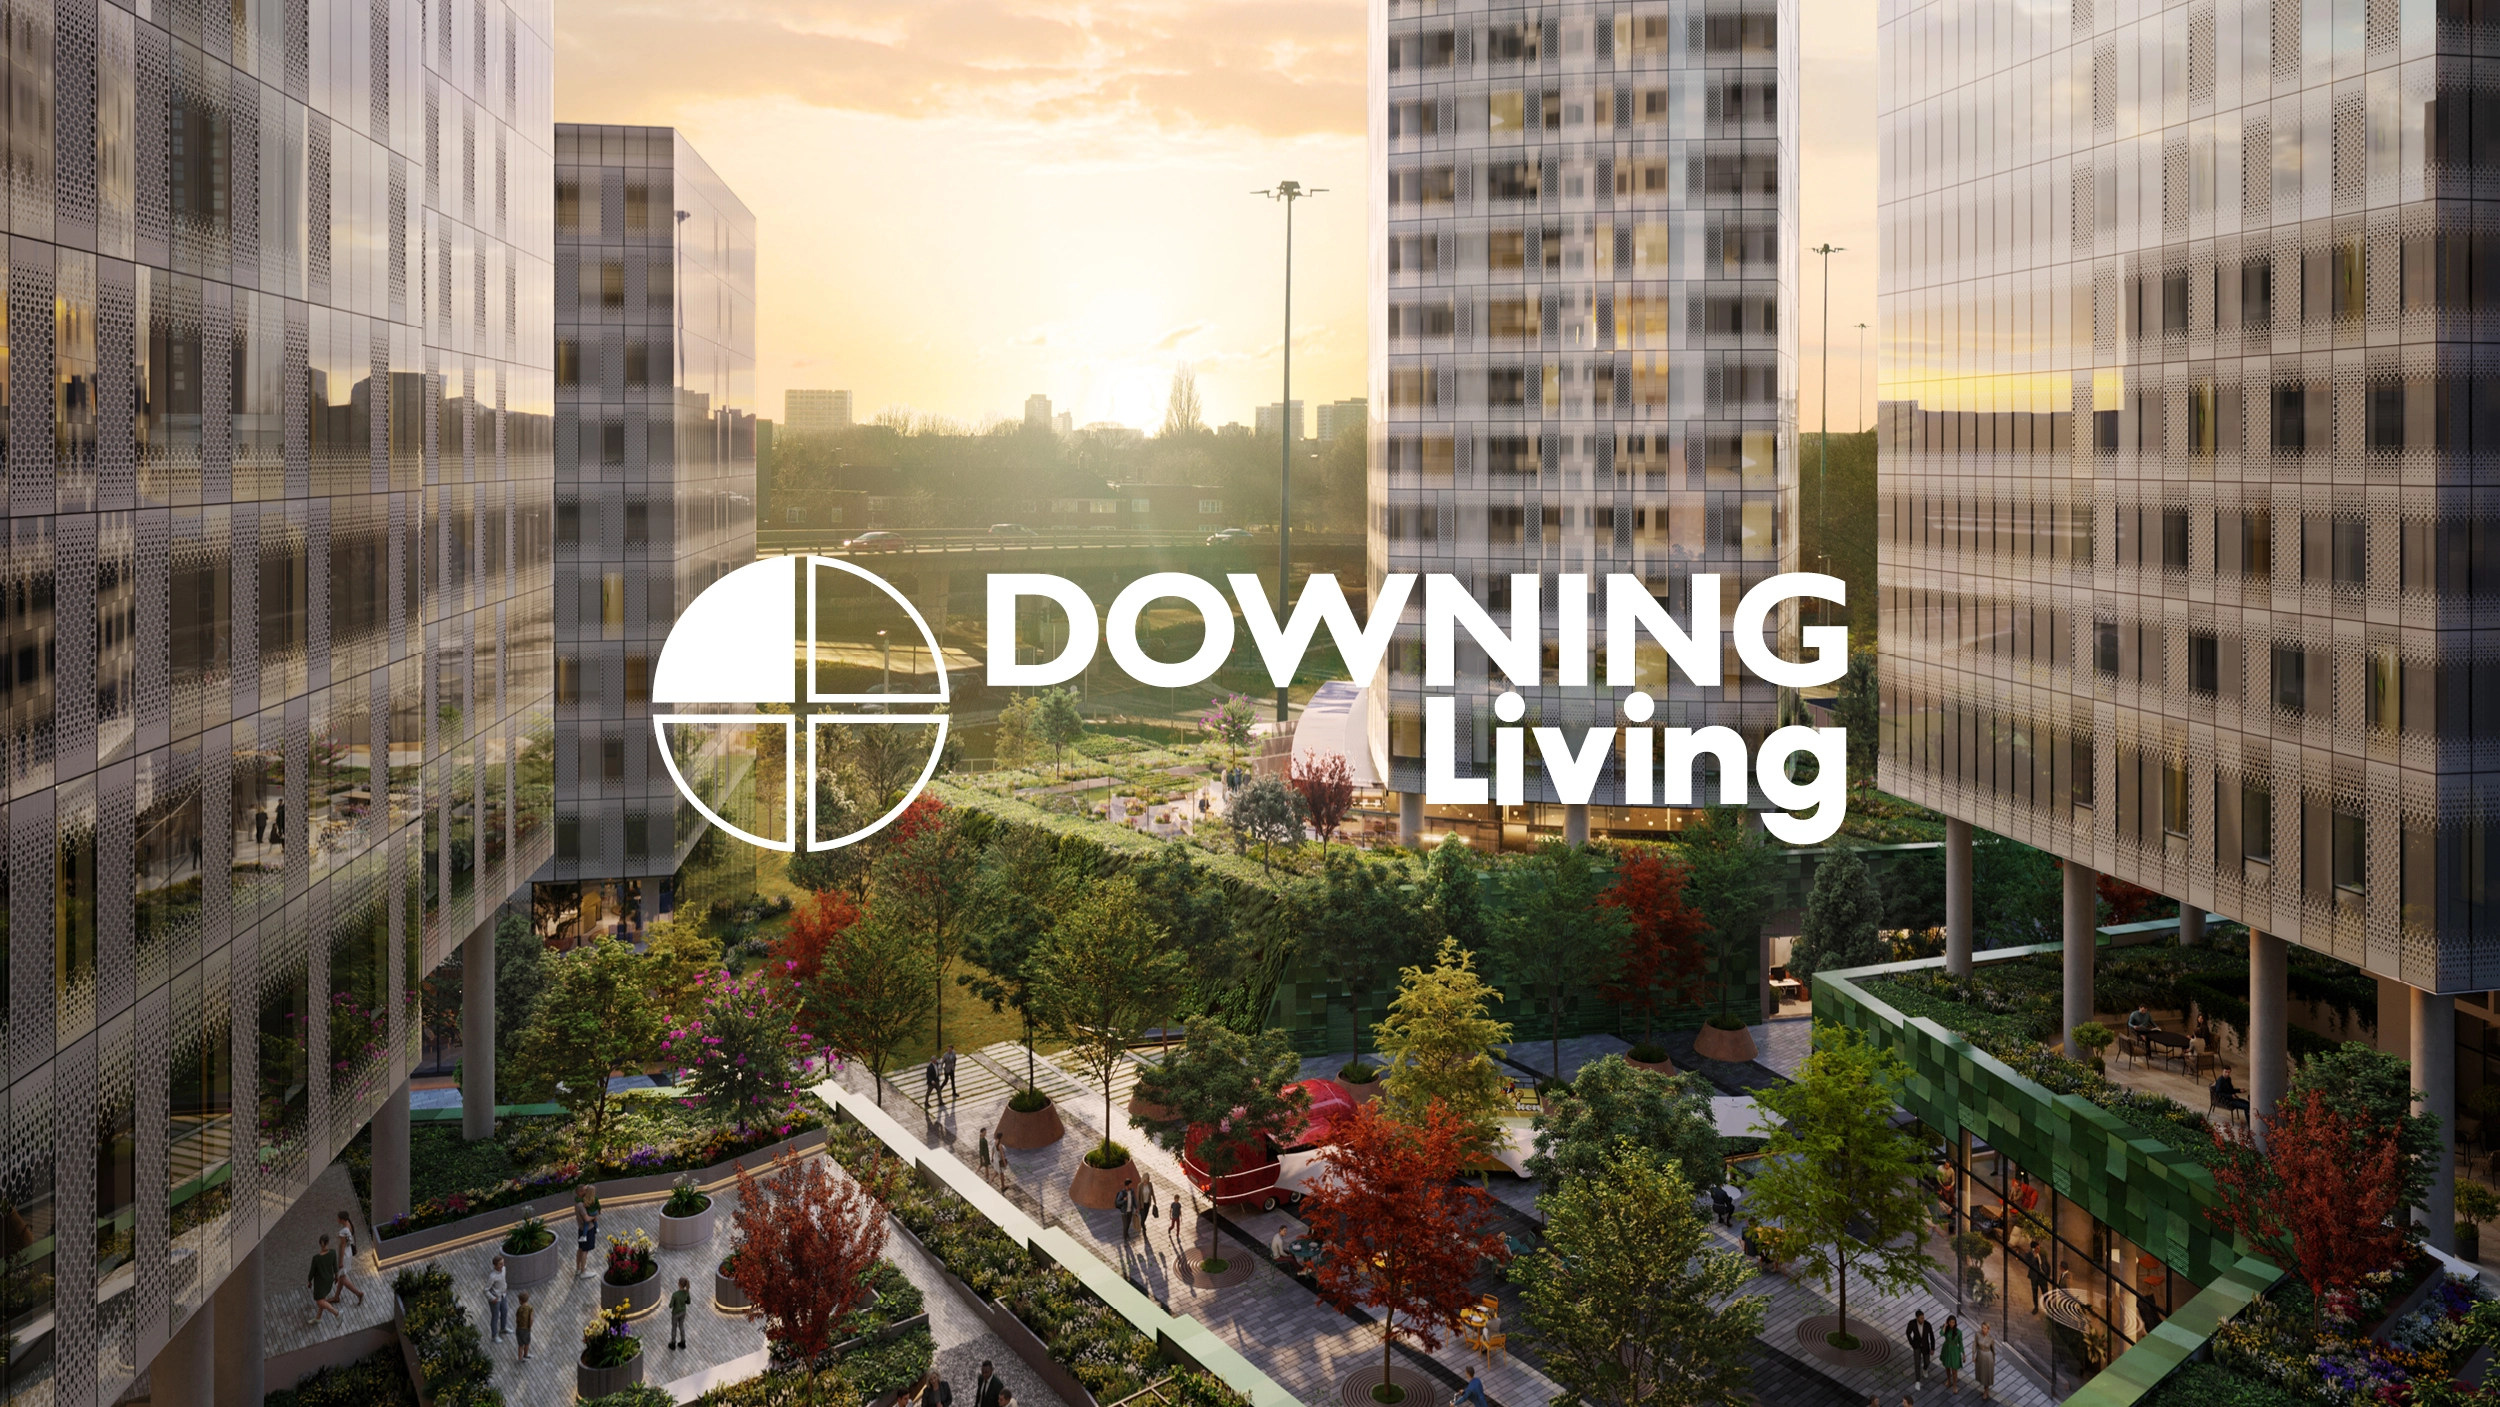 Downing Living